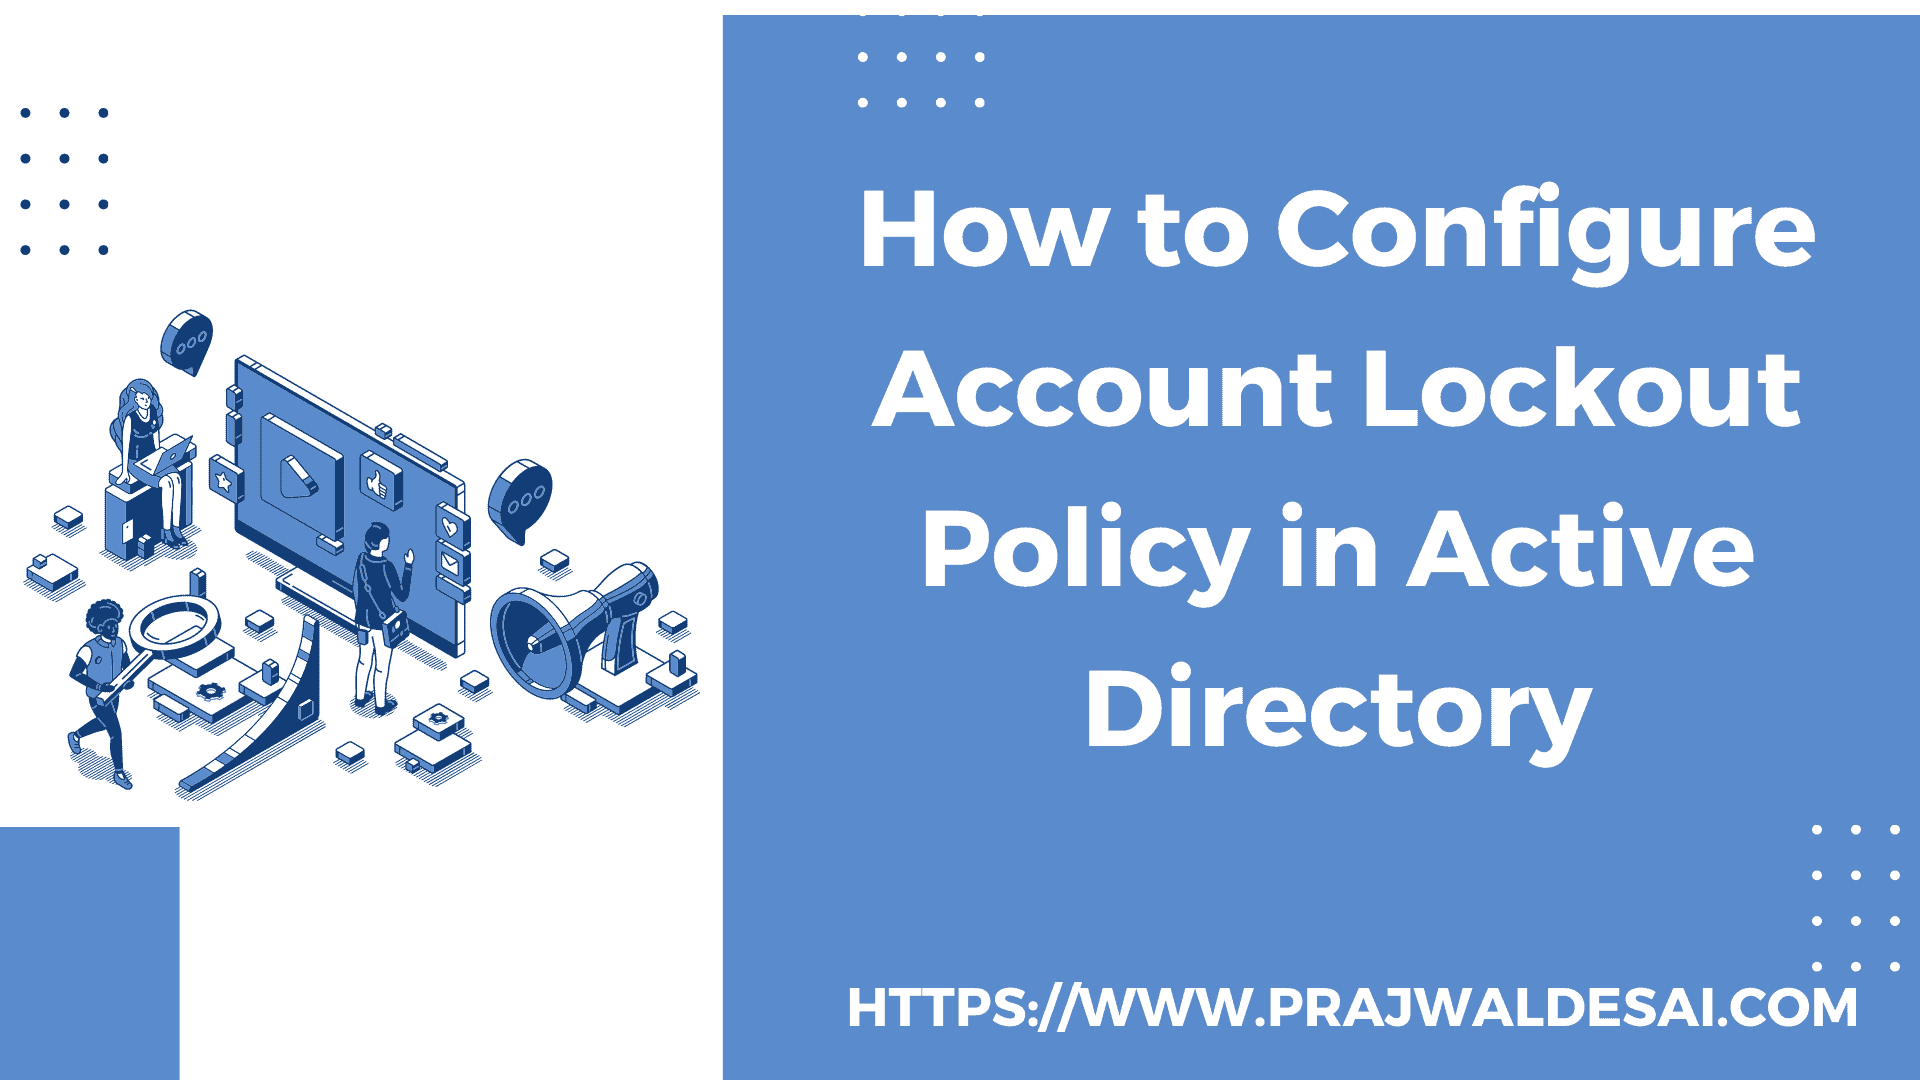 How to Configure Account Lockout Policy in Active Directory